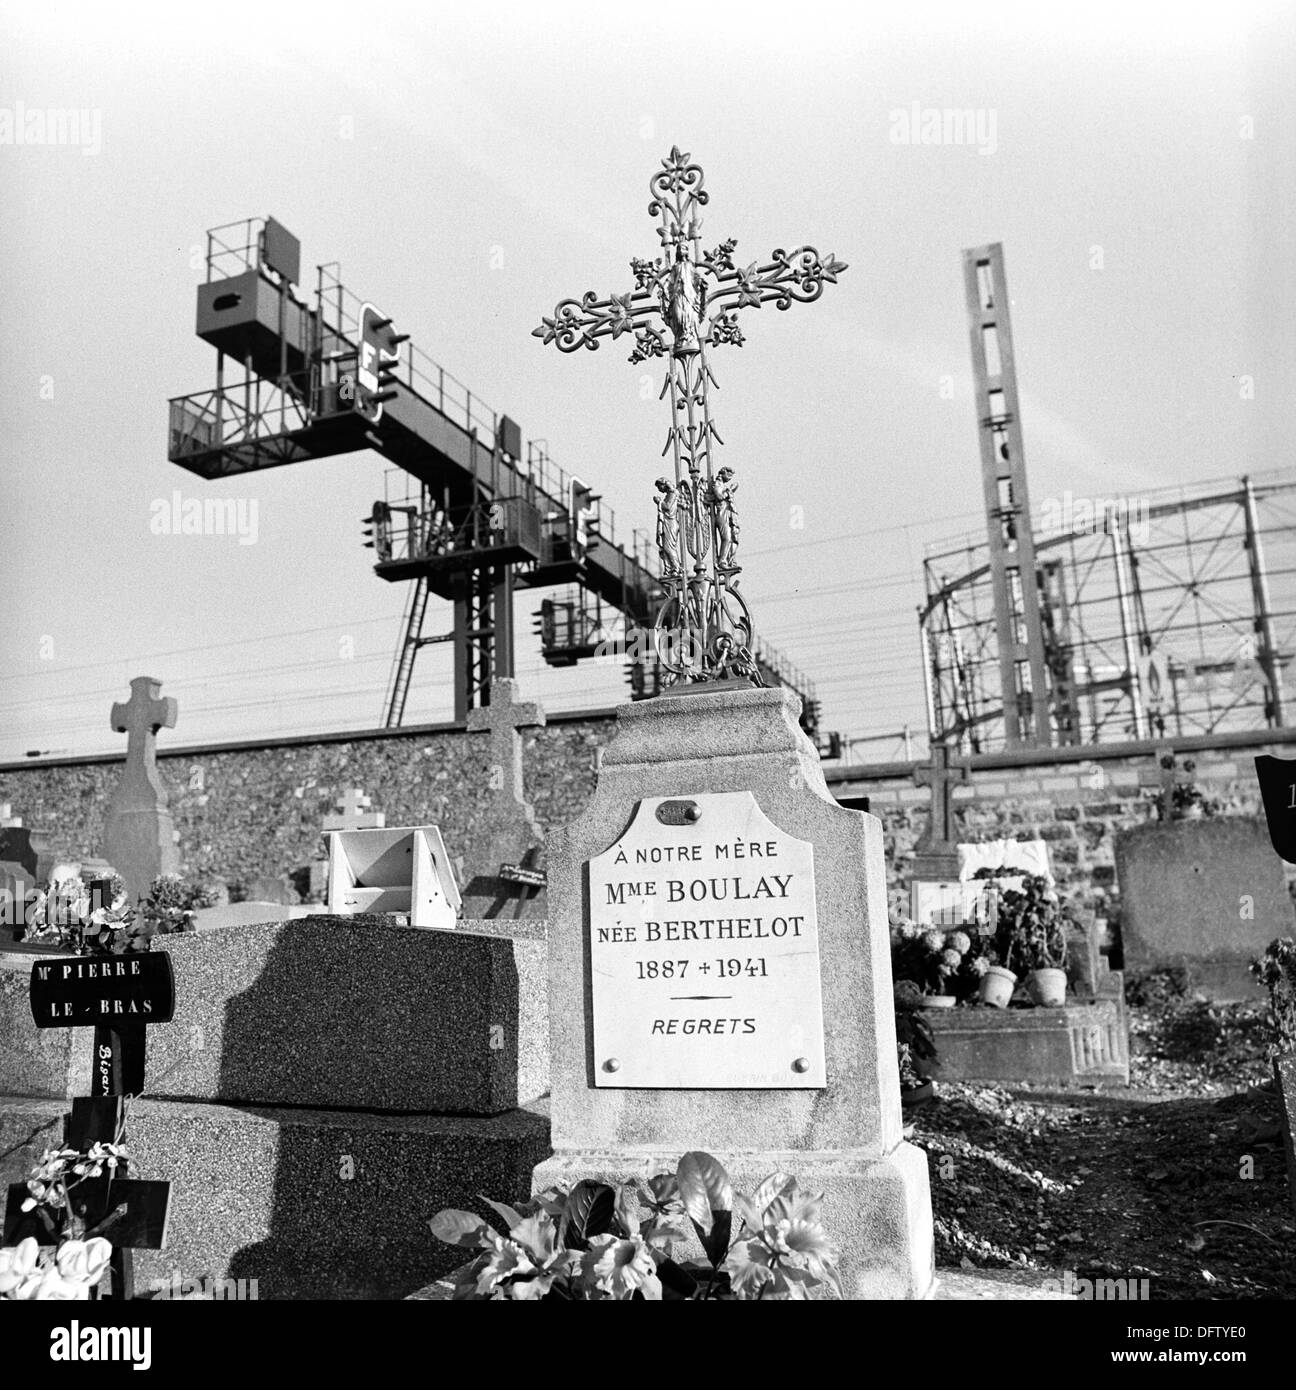 View of a grave on Pere Lachaise, the biggest cemetery in Paris, France, in November 1970. The gravestone commemorates 'Our mother Madame Boulay'. In the background, industrial plants are pictured. On the Pere Lachaise cemetery, many famous historical figures are buried. Photo: Wilfried Glienke Stock Photo